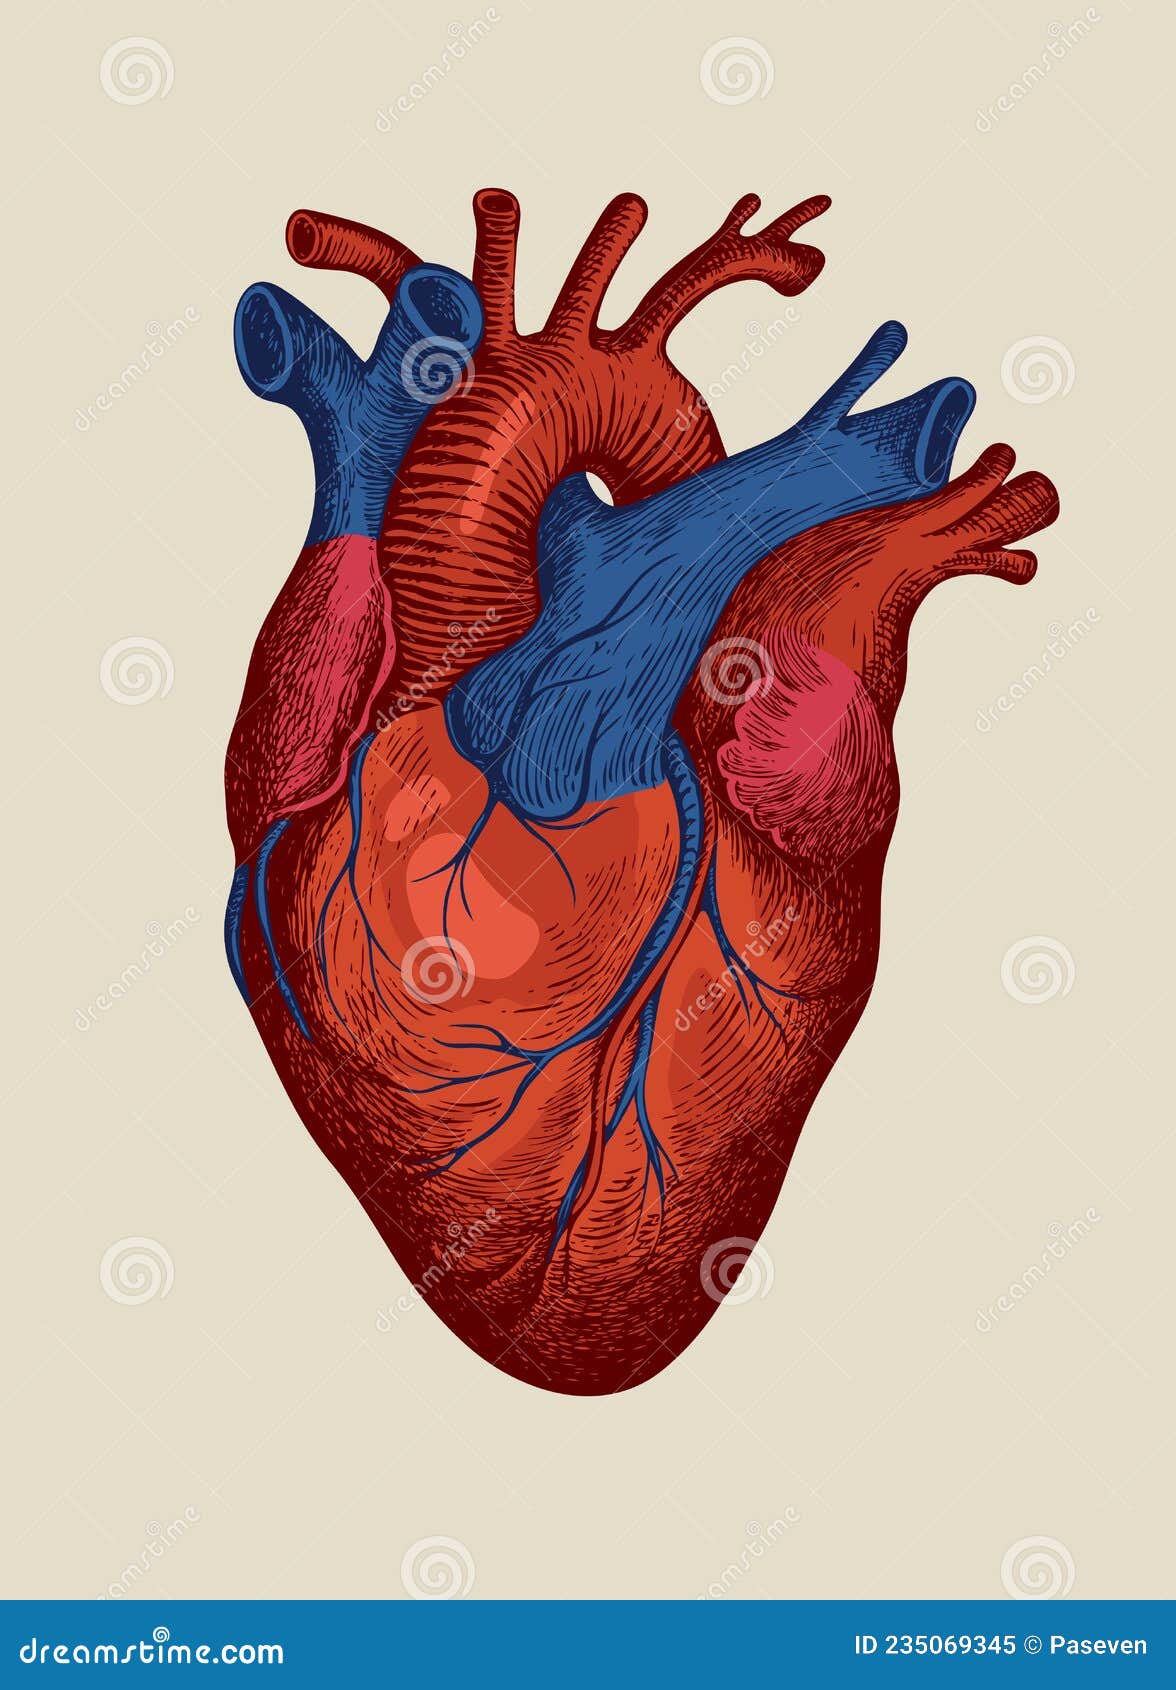 detailed-drawing-human-heart-retro-style